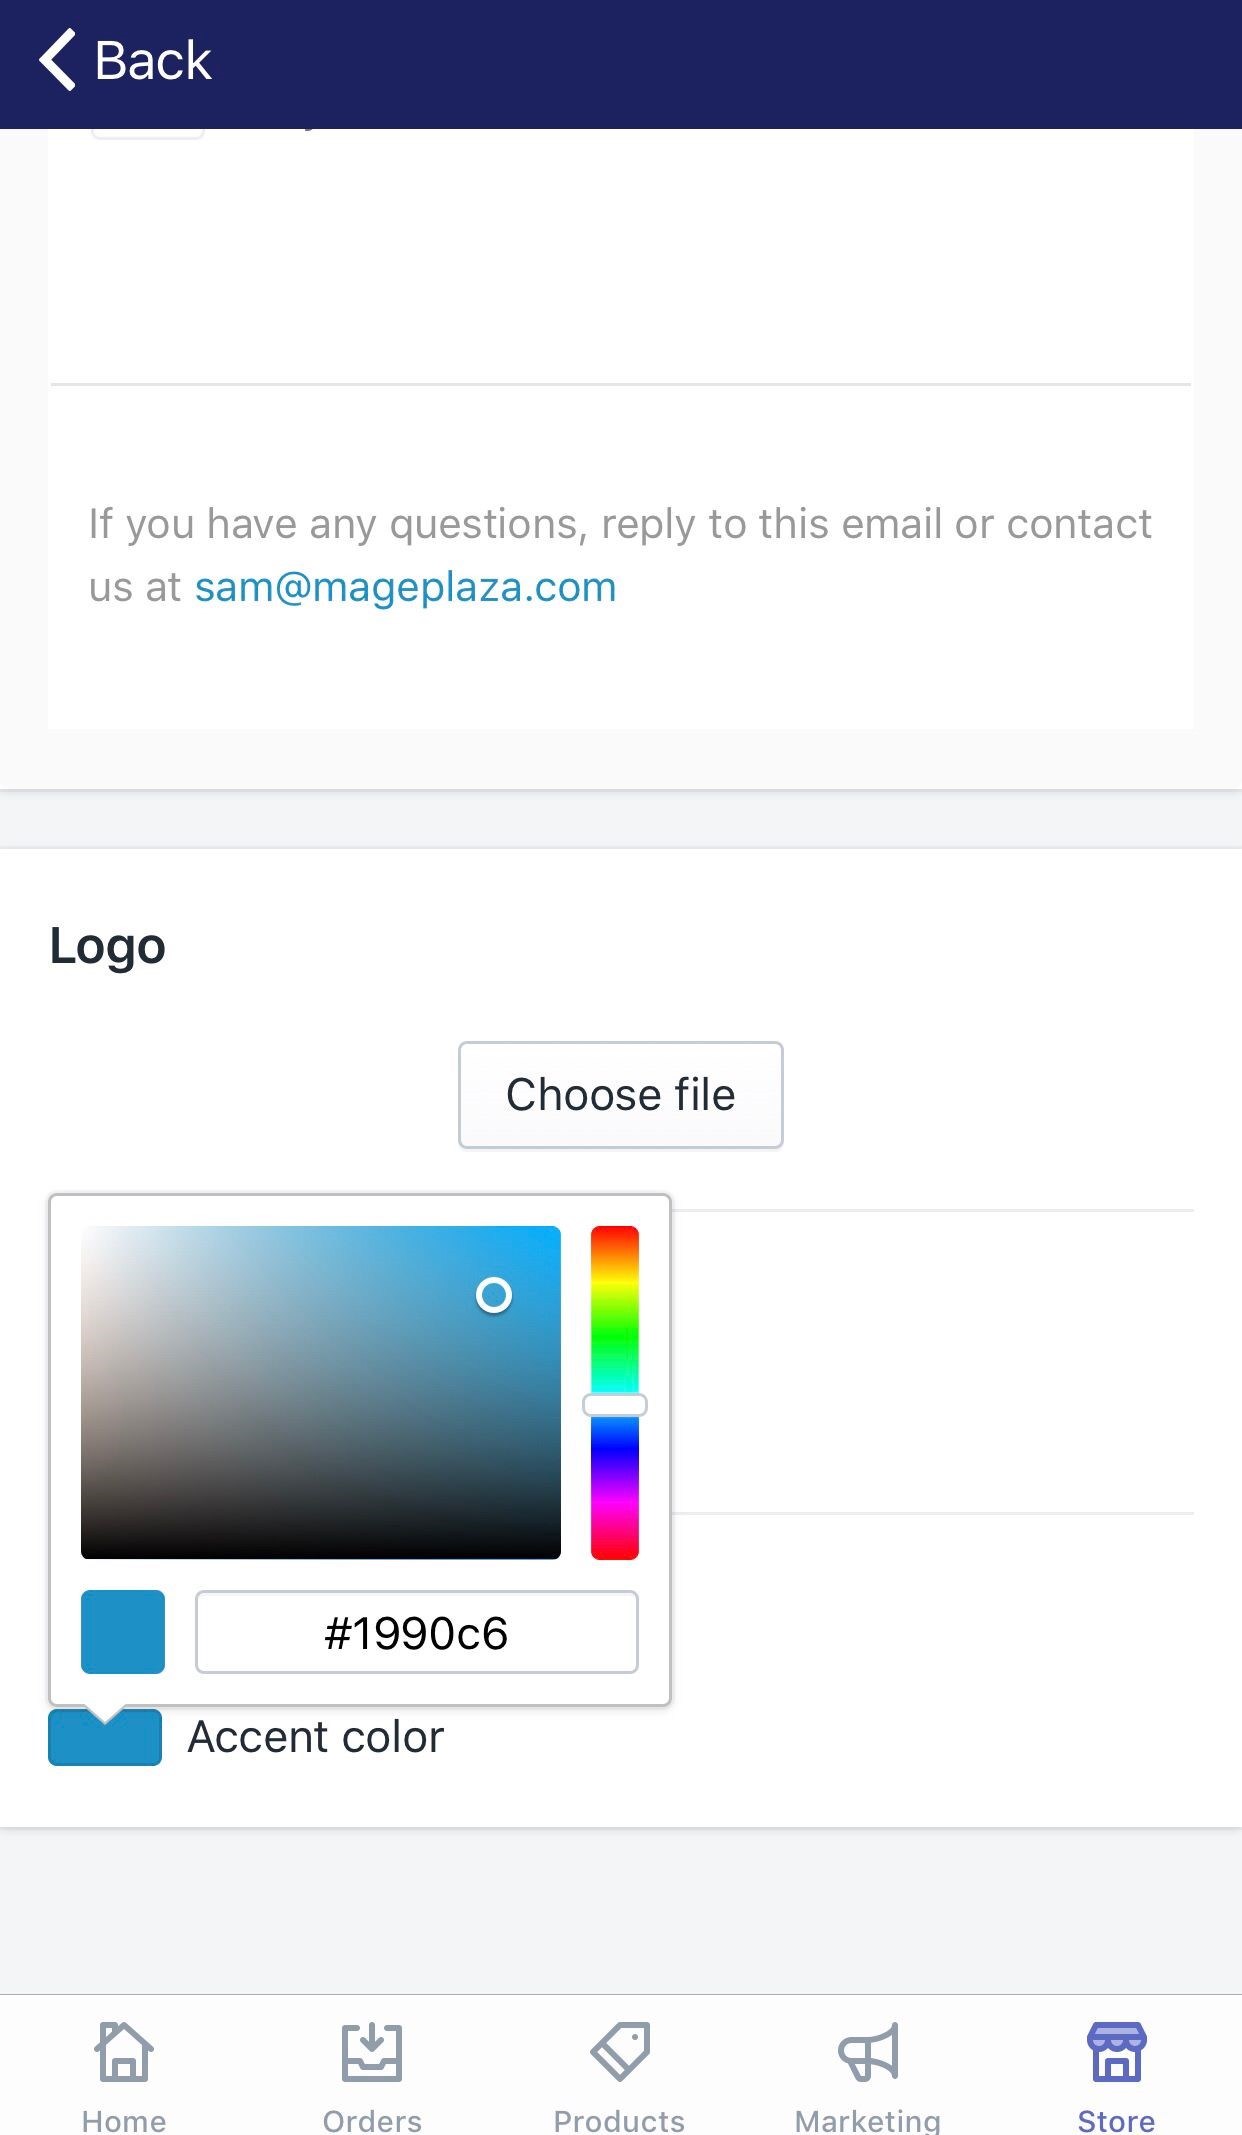 How to choose colors for your email templates